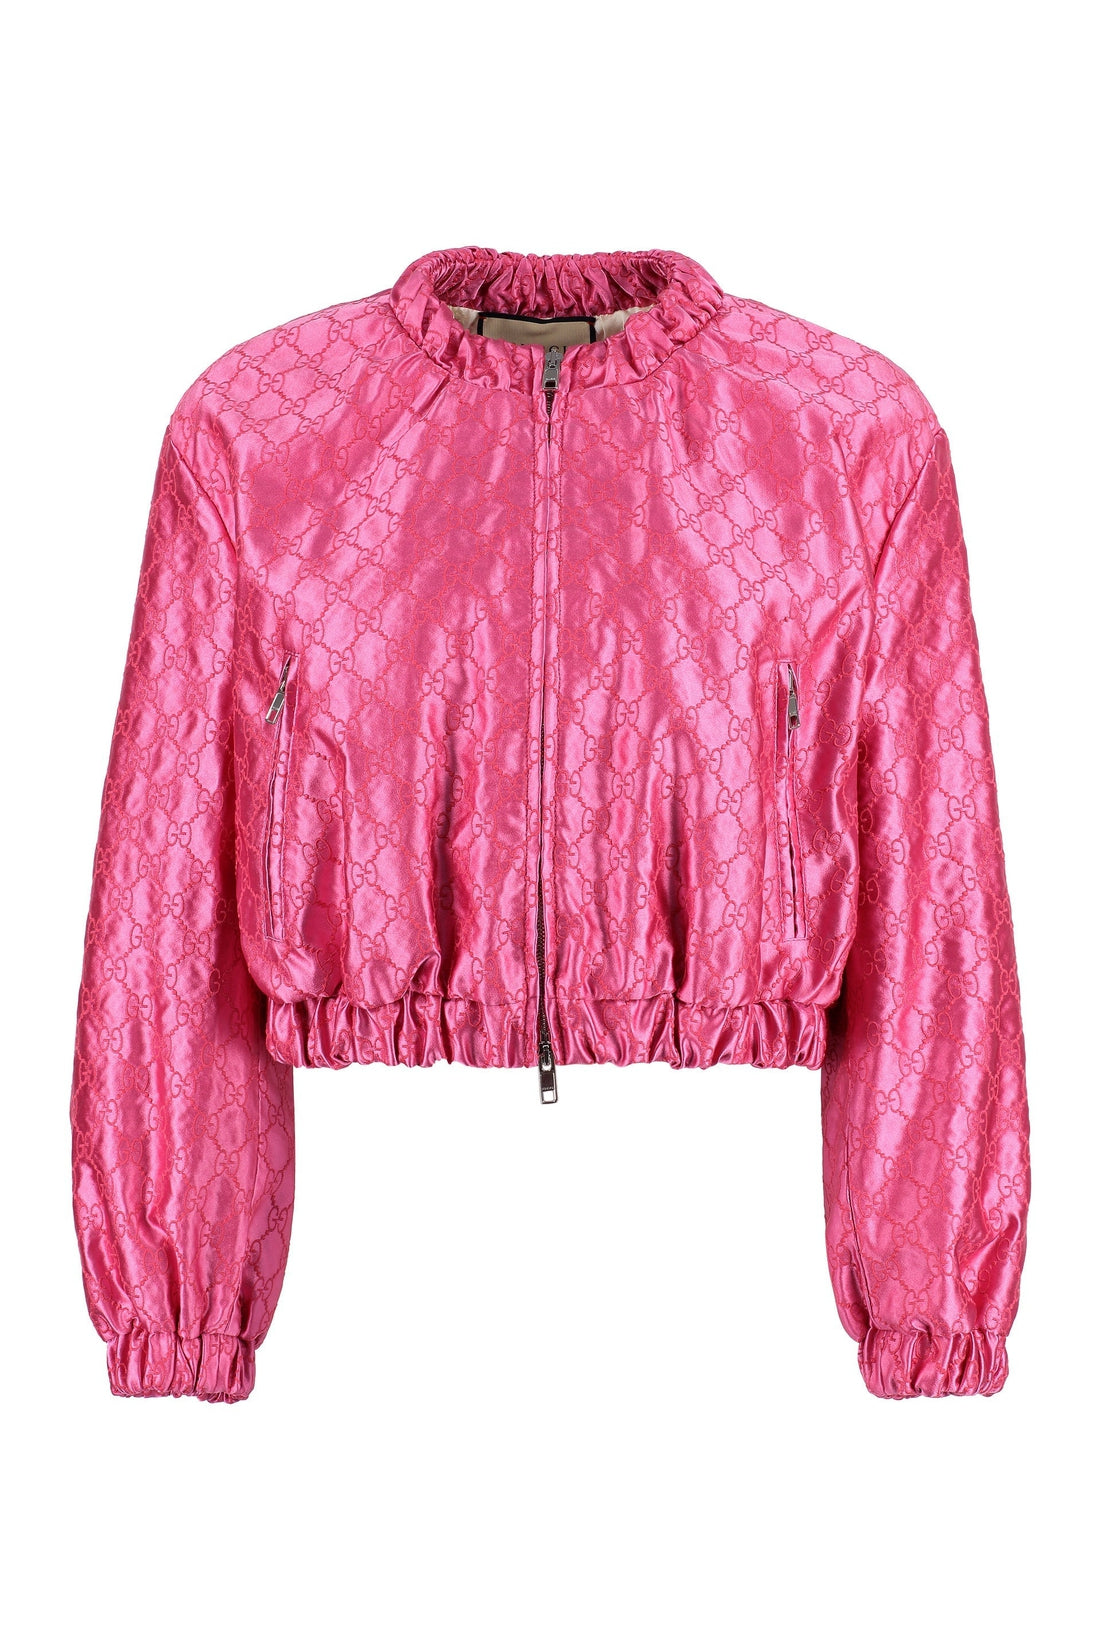 Gucci-OUTLET-SALE-Embroidered silk bomber jacket-ARCHIVIST